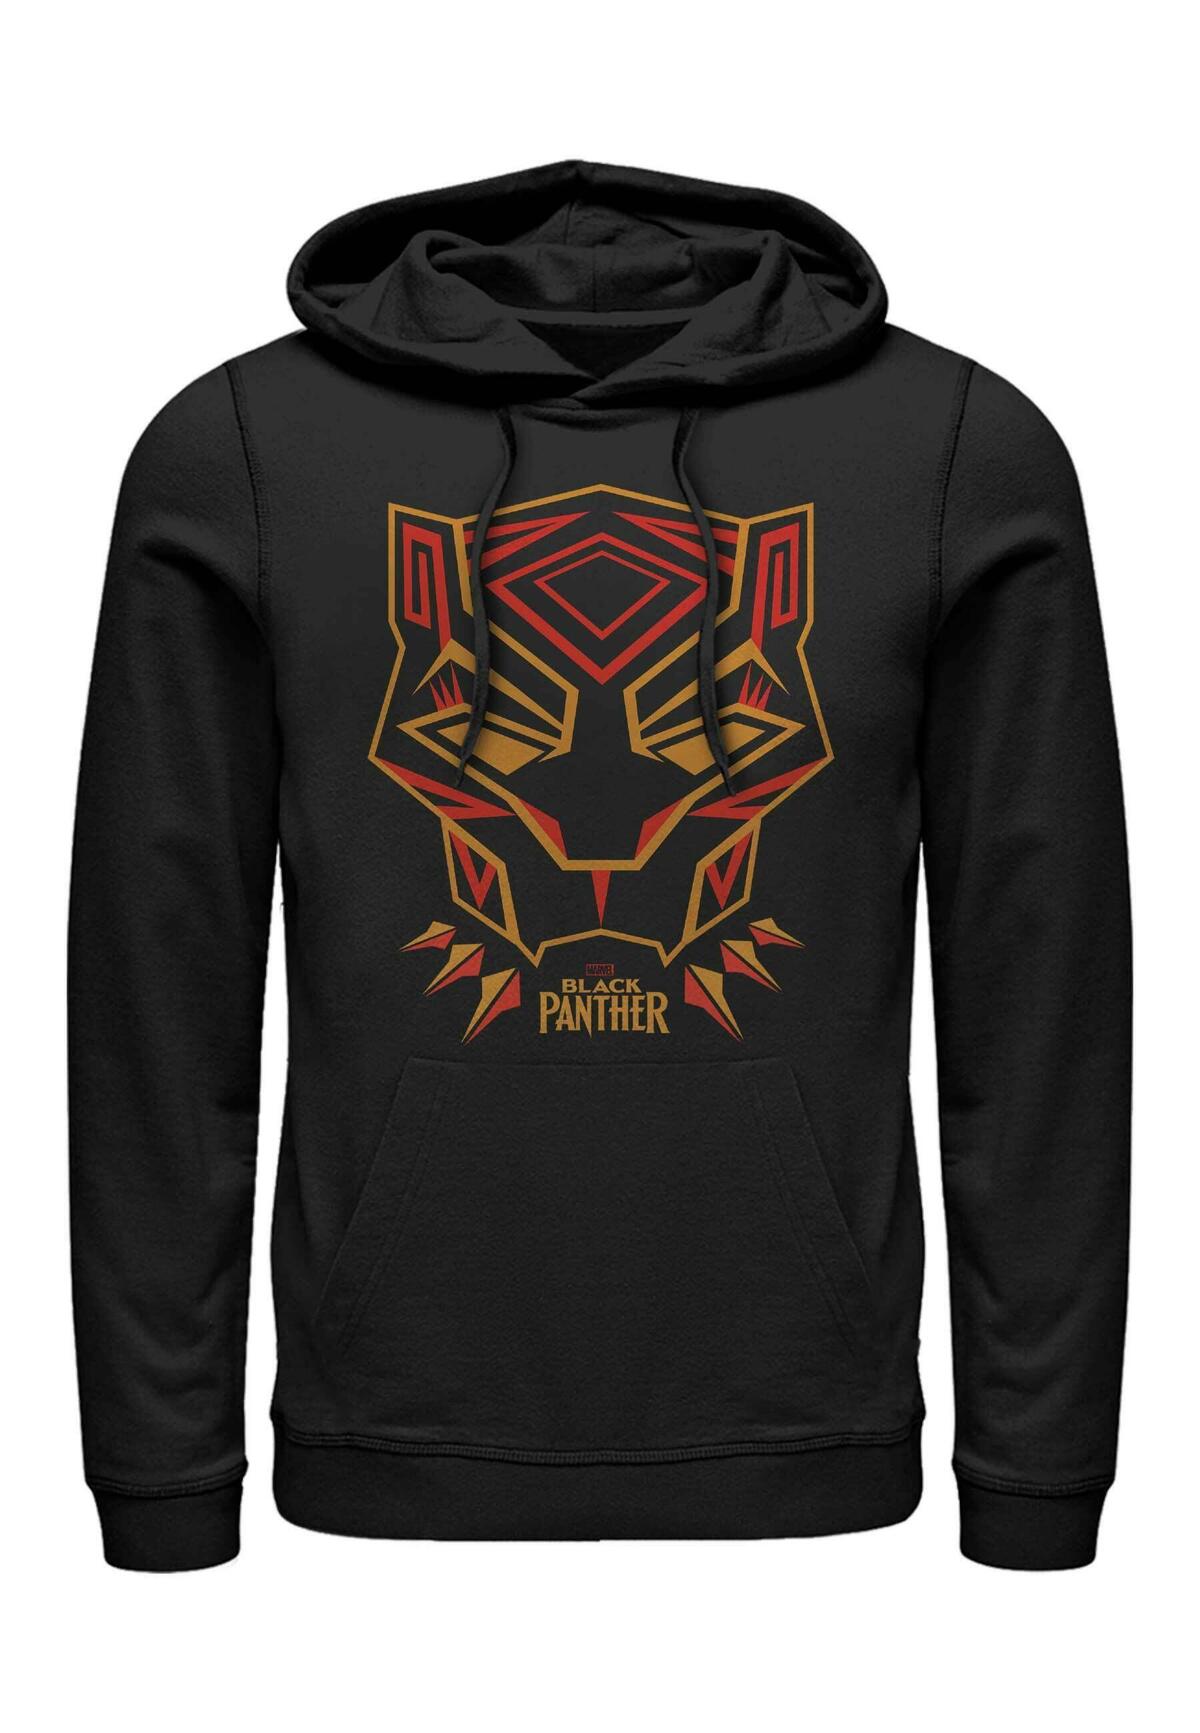 Пуловер BLACK PANTHER PANTHER GEOMETRY UNISEX